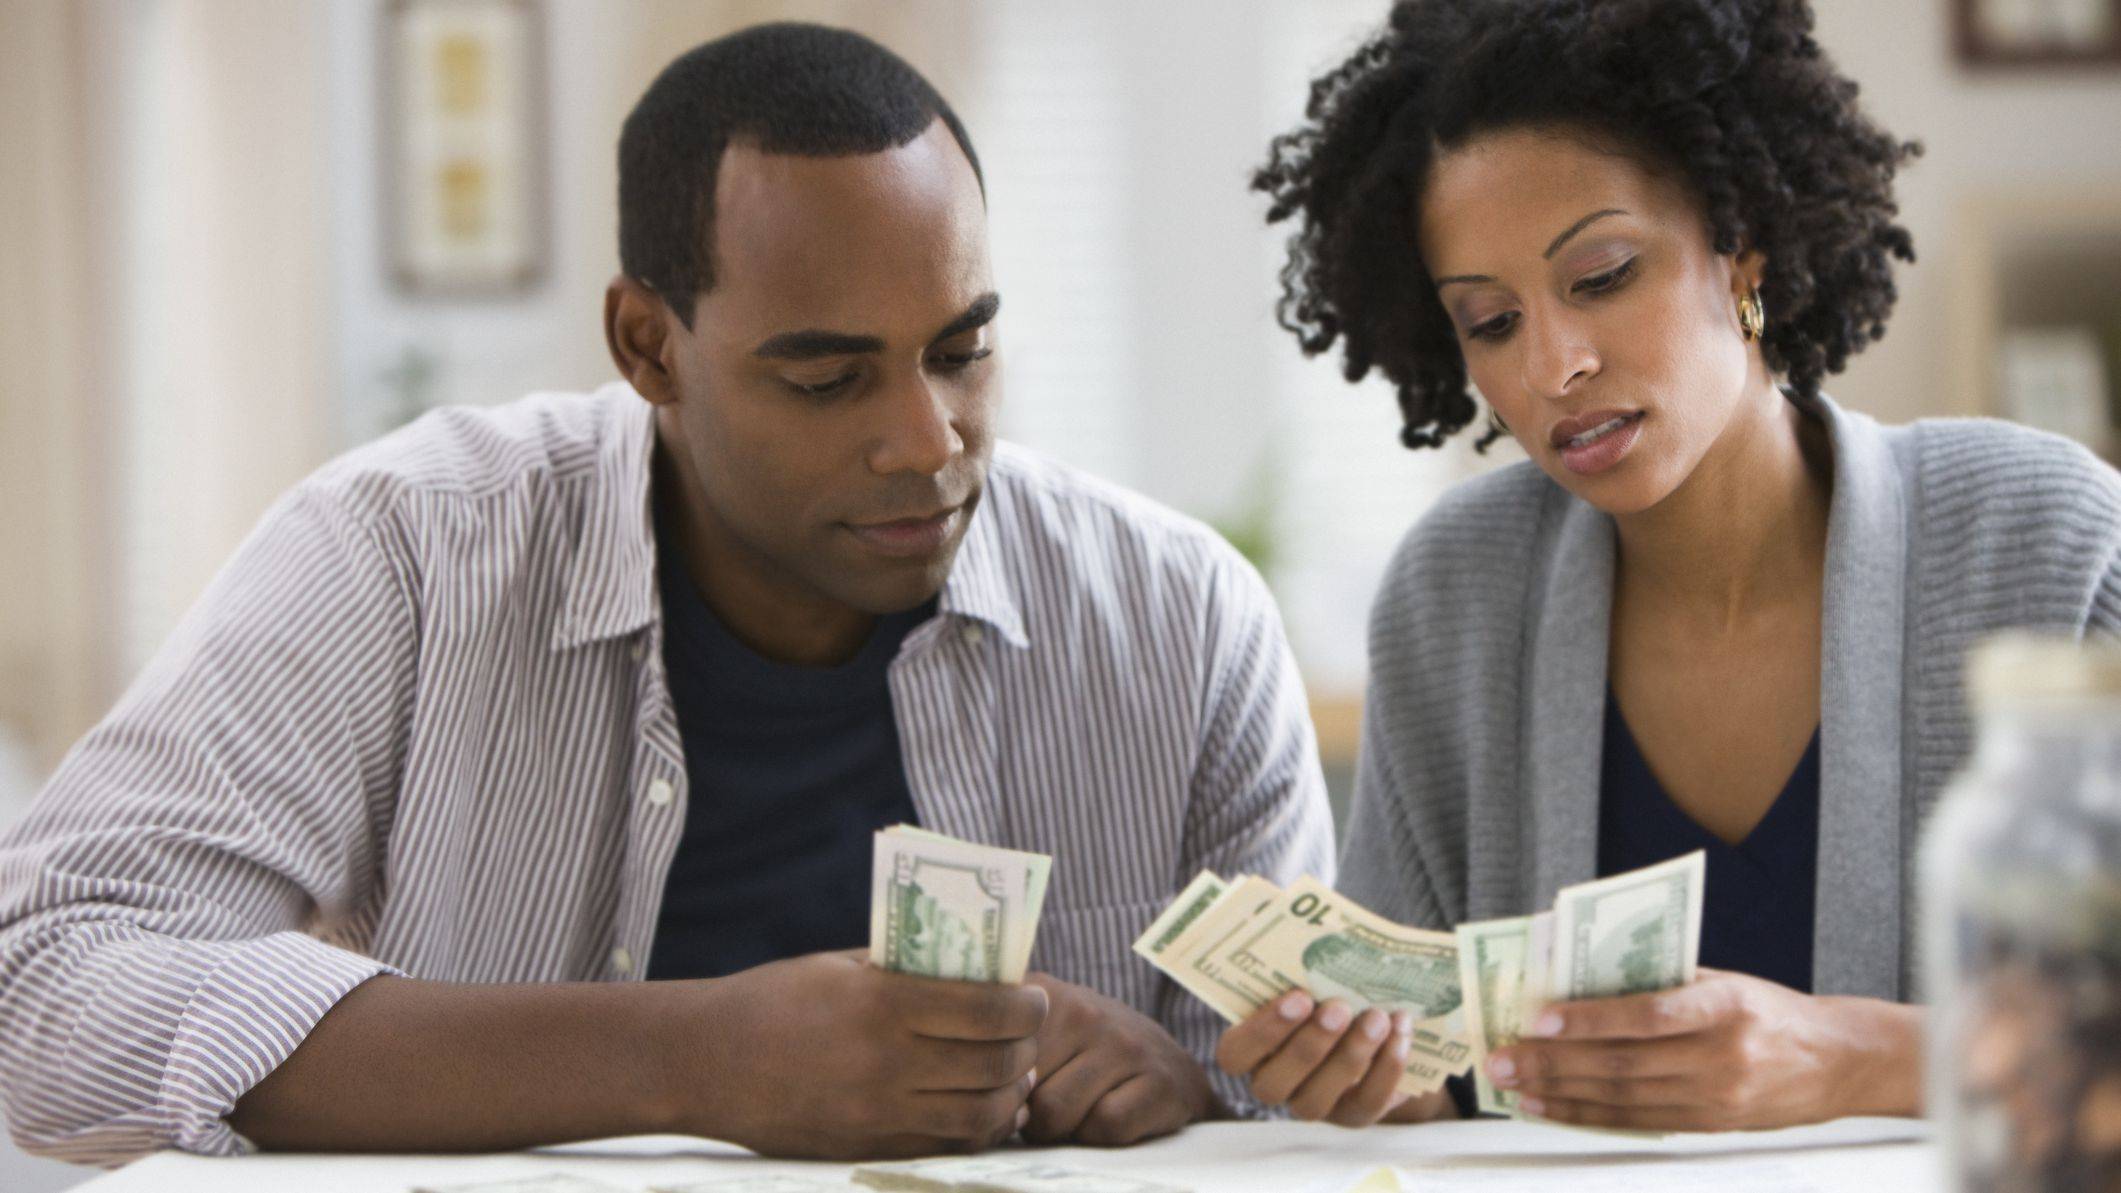 HOW TO NOT LET MONEY RUIN YOUR HAPPY MARRIAGE